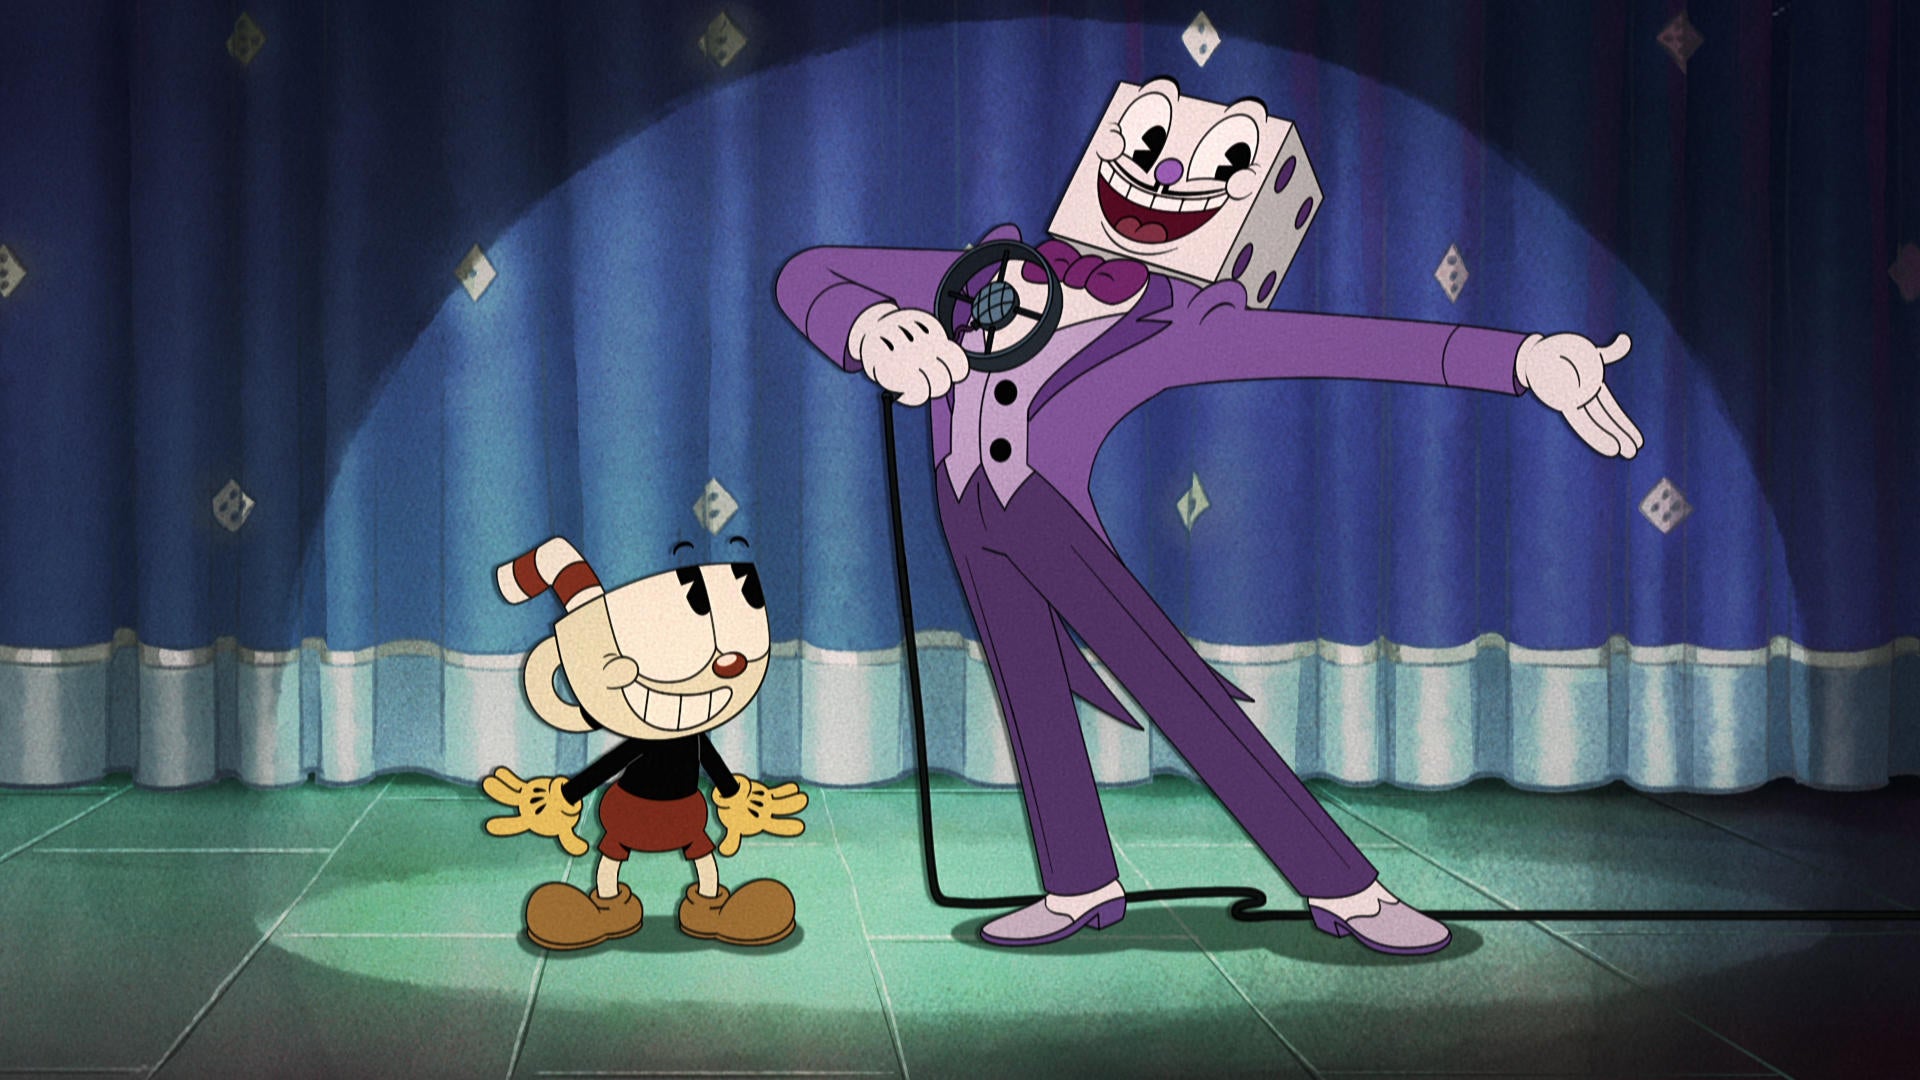 Netflix: The Cuphead Show Season 2 is coming in August - My Nintendo News